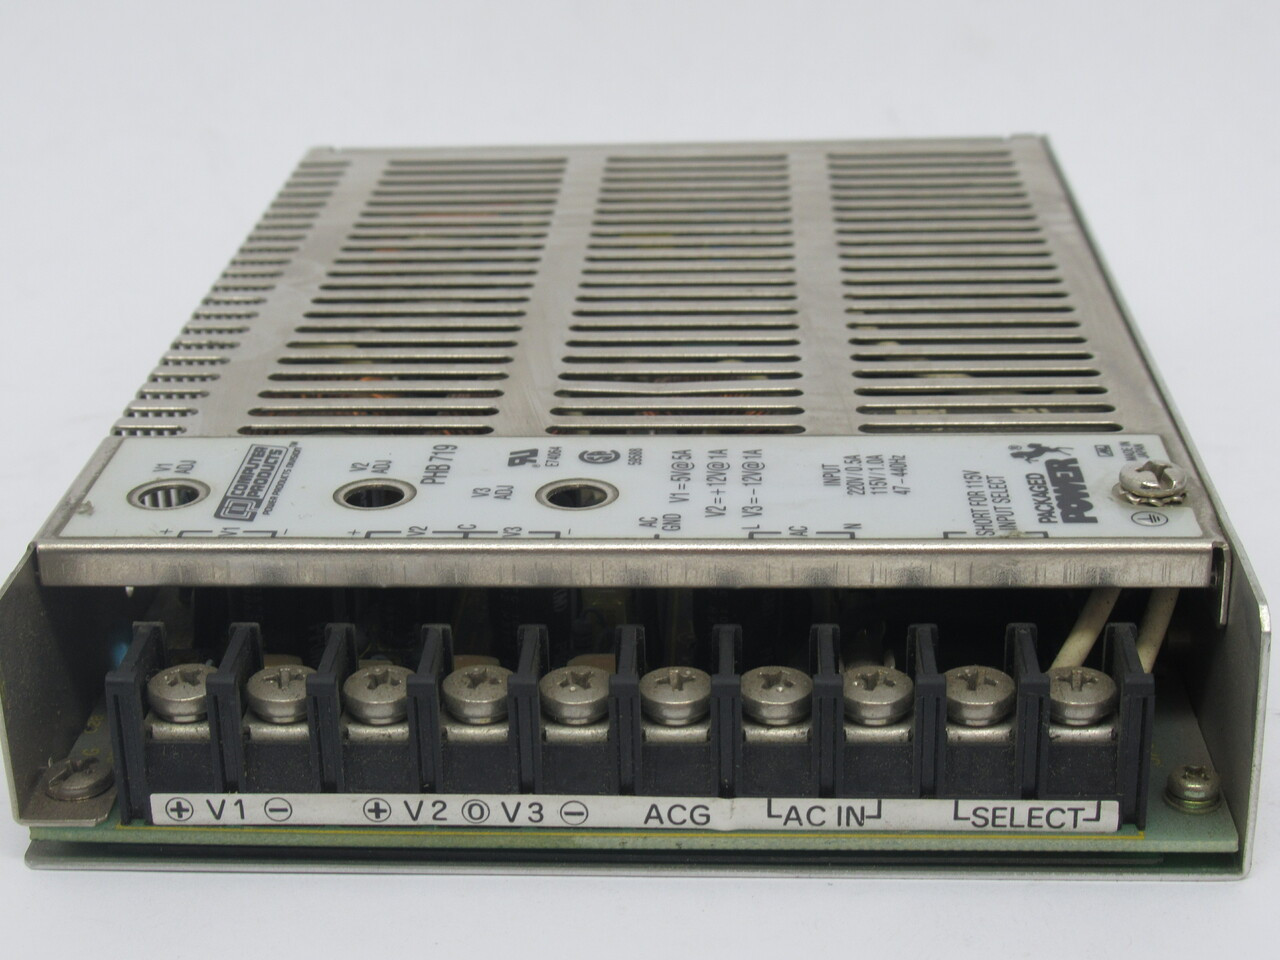 Computer Products PHB719 Multi Voltage Power Supply In: 220V/0.5A 115V/1.0A USED